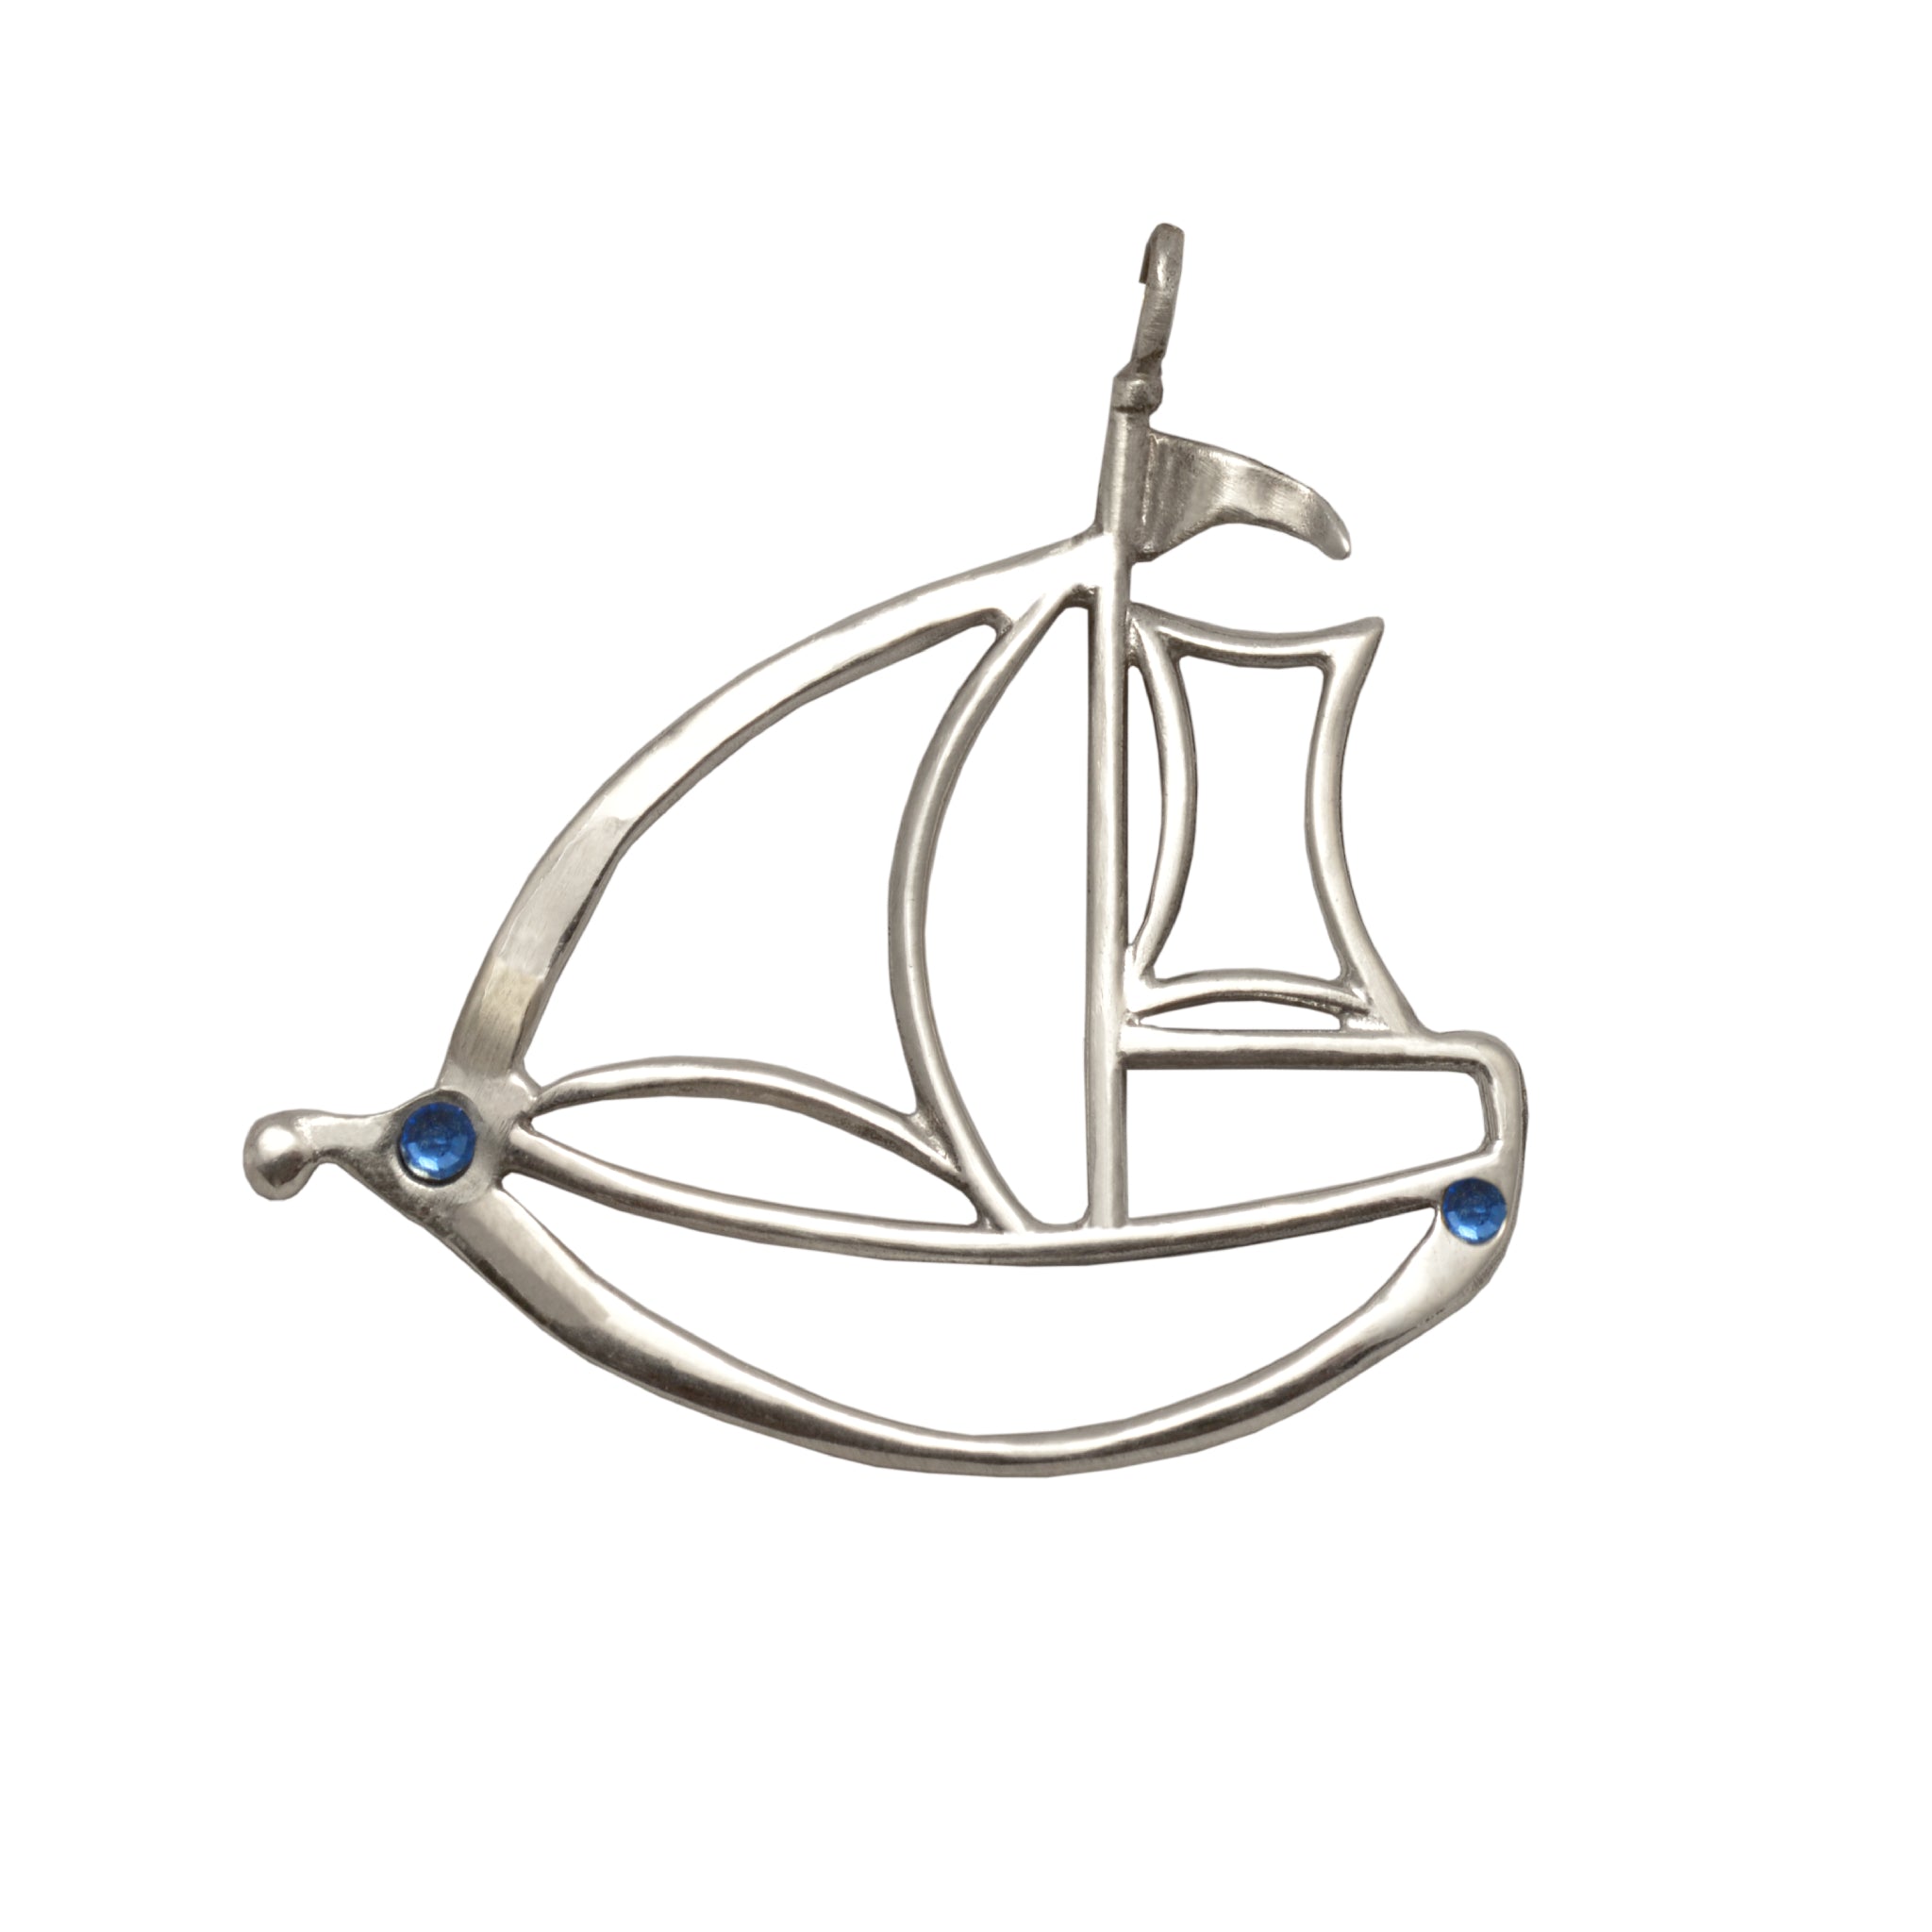 Sailboat Charm on plexiglass, silver charm with bronze leaves, home decor, gift idea, charm favors (PX-12)